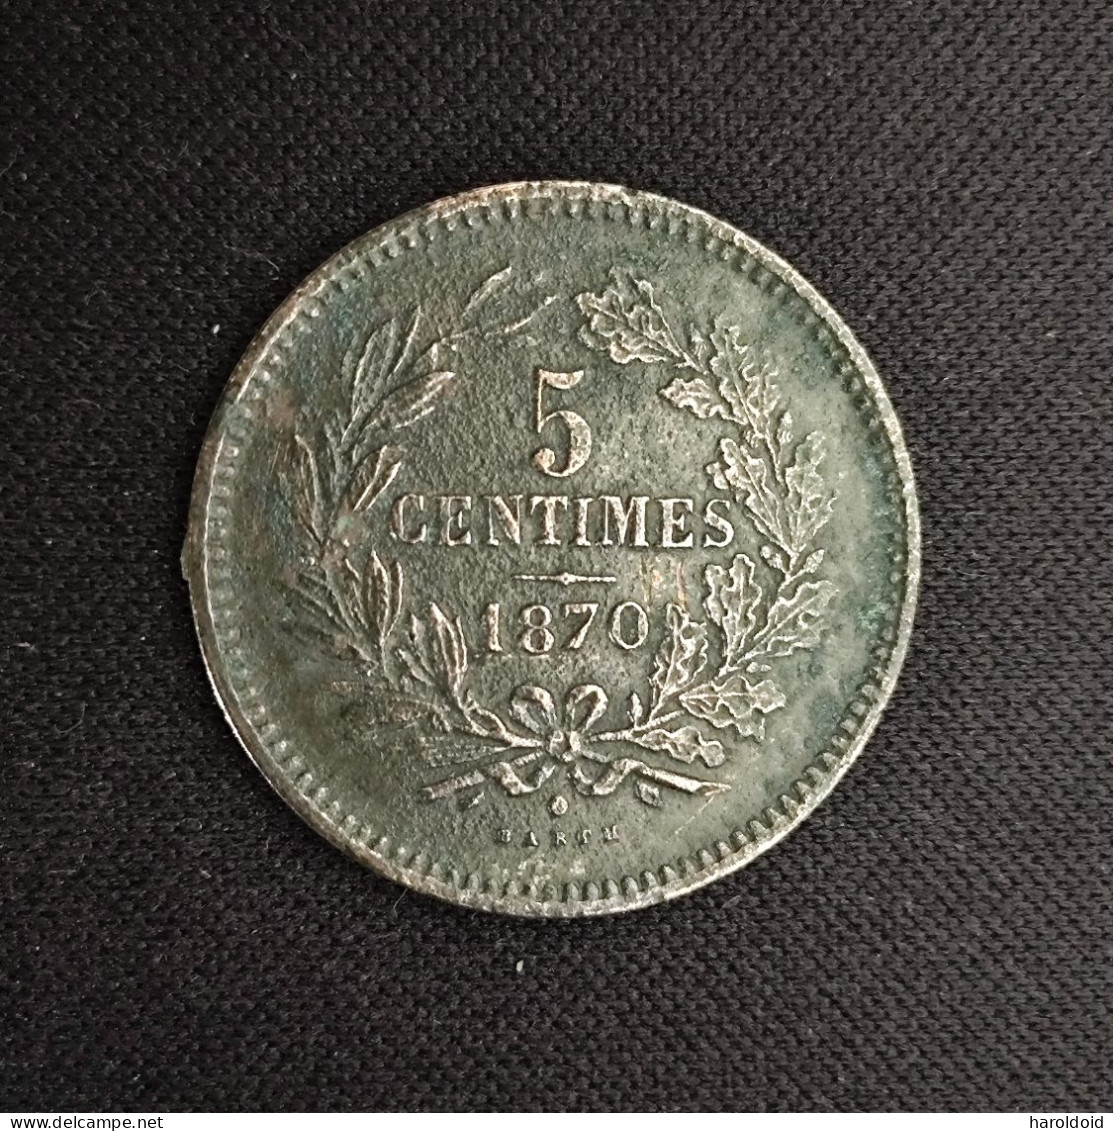 LUXEMBOURG - 5 CENTS 1870 - Luxembourg